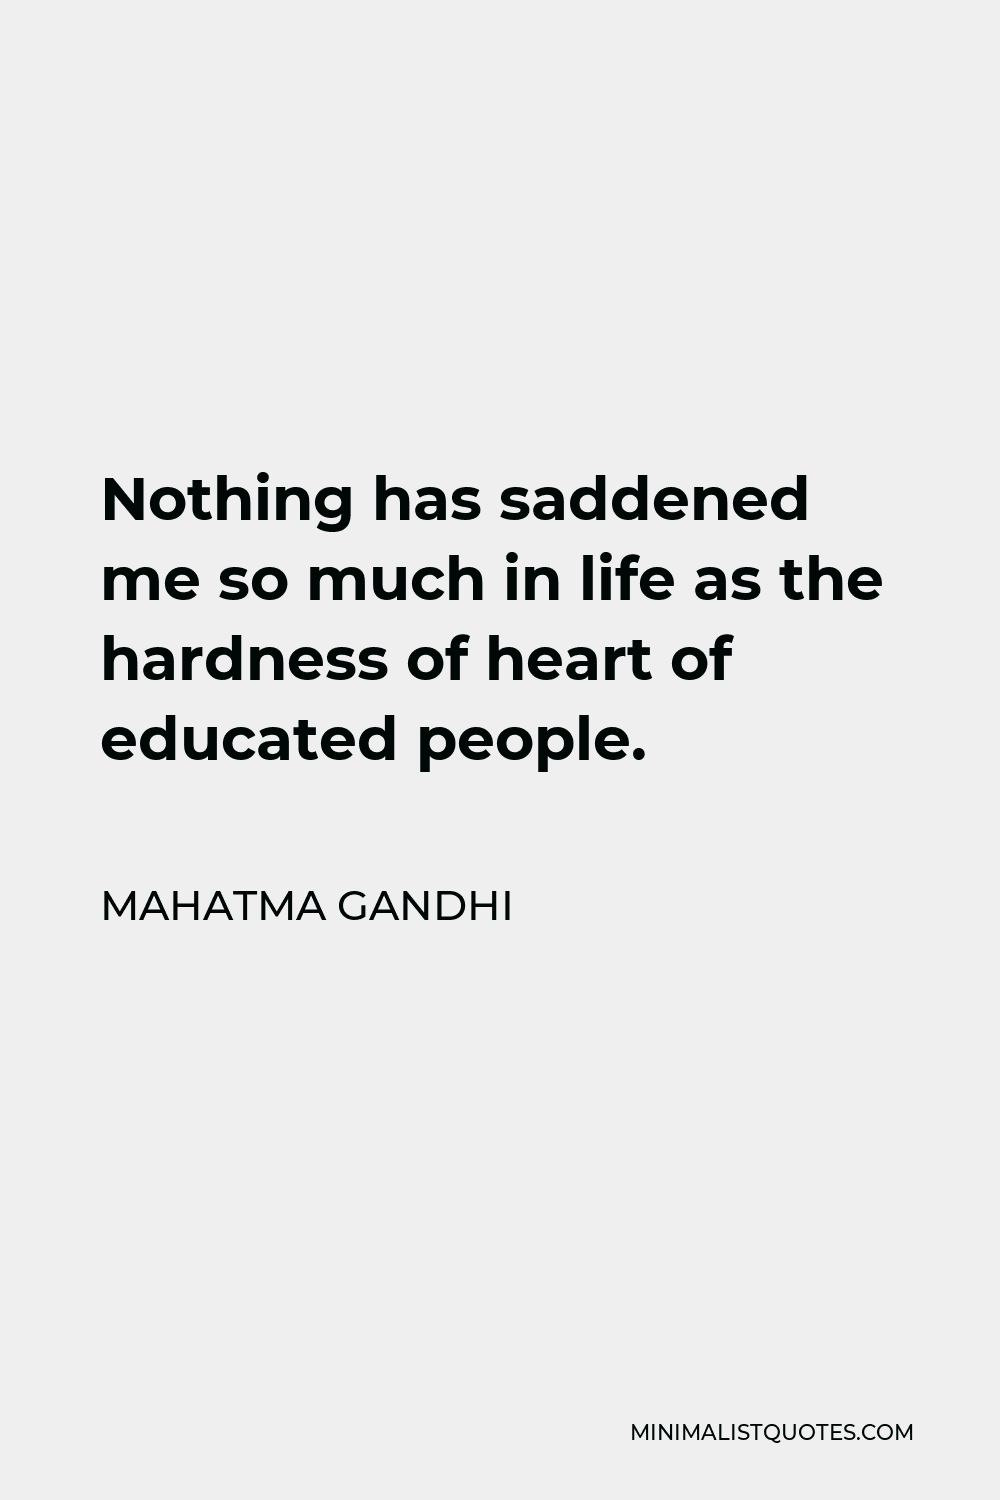 Mahatma Gandhi Quote - Nothing has saddened me so much in life as the hardness of heart of educated people.